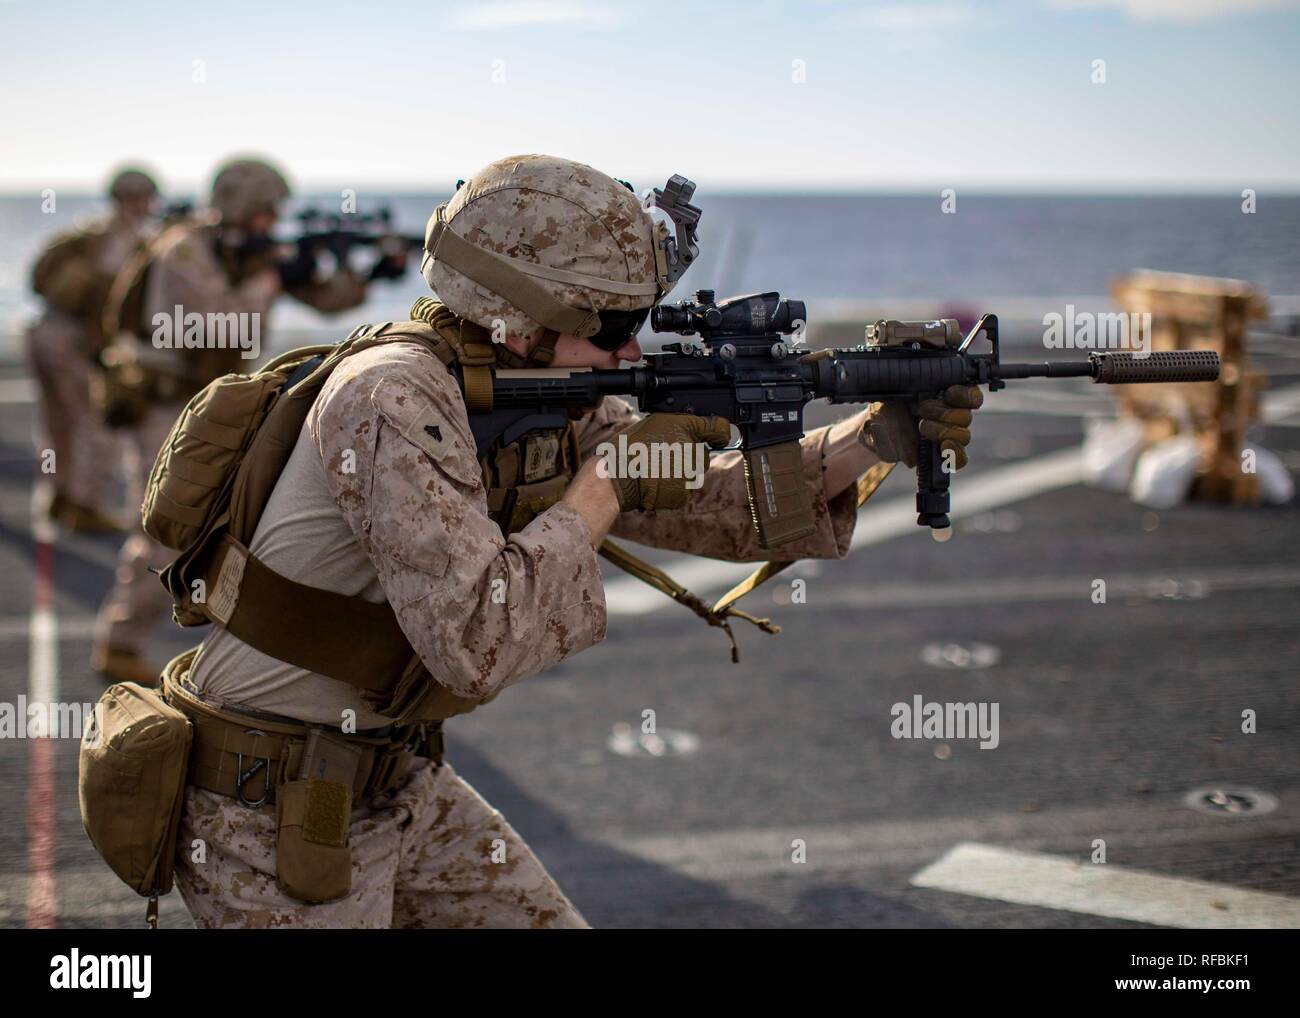 MEDITERRANEAN SEA (Jan. 21, 2019) Marines with the Battalion Landing Team, 1st Battalion, 2nd Marine Regiment, 22nd Marine Expeditionary Unit, practice immediate action drills on the flight-deck of the USS Arlington (LPD 24) during a live-fire deck shoot while deployed in the Mediterranean Sea, Jan. 21, 2019. The USS Arlington is making a scheduled deployment as part of the 22nd MEU and the Kearsarge Amphibious Ready Group, in support of maritime security operations, crisis response and theatre security cooperation, while also providing a forward Naval and Marine presence. (U.S. Marine Corps p Stock Photo